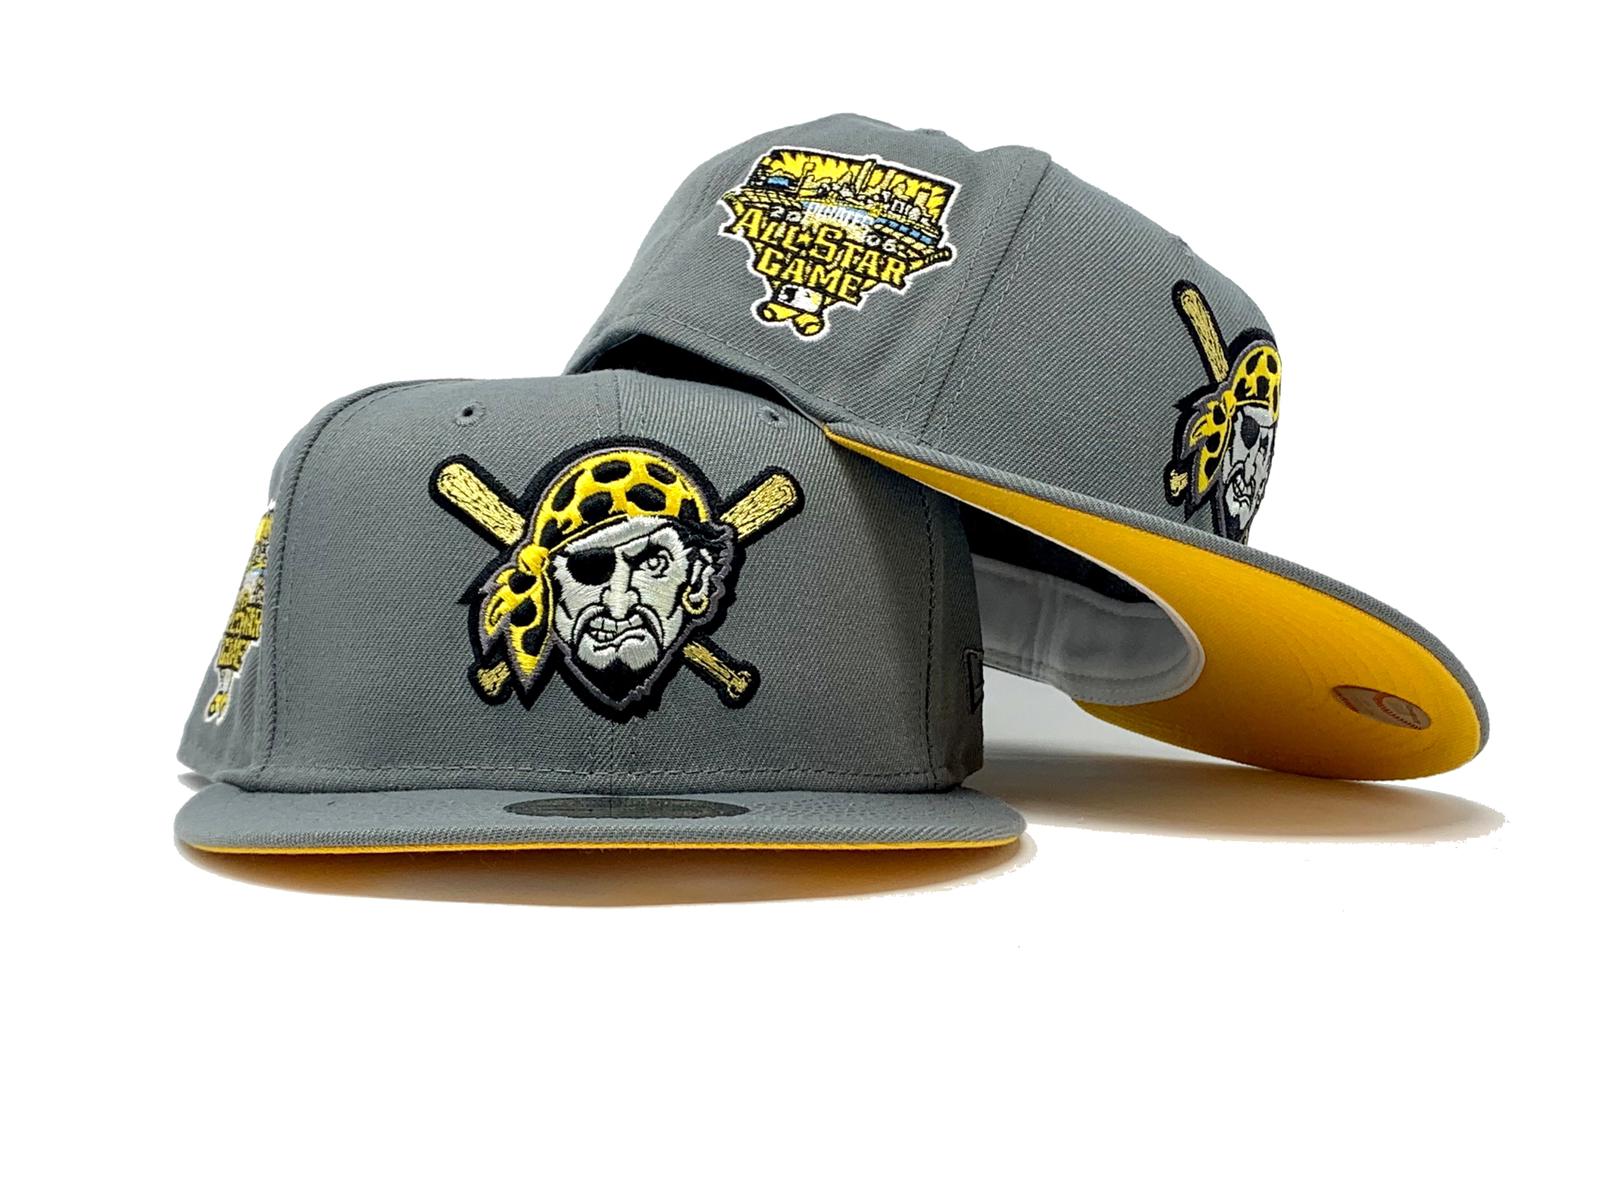 PITTSBURGH PIRATES 2016 ALL STAR GAME STORM GRAY YELLOW BRIM NEW